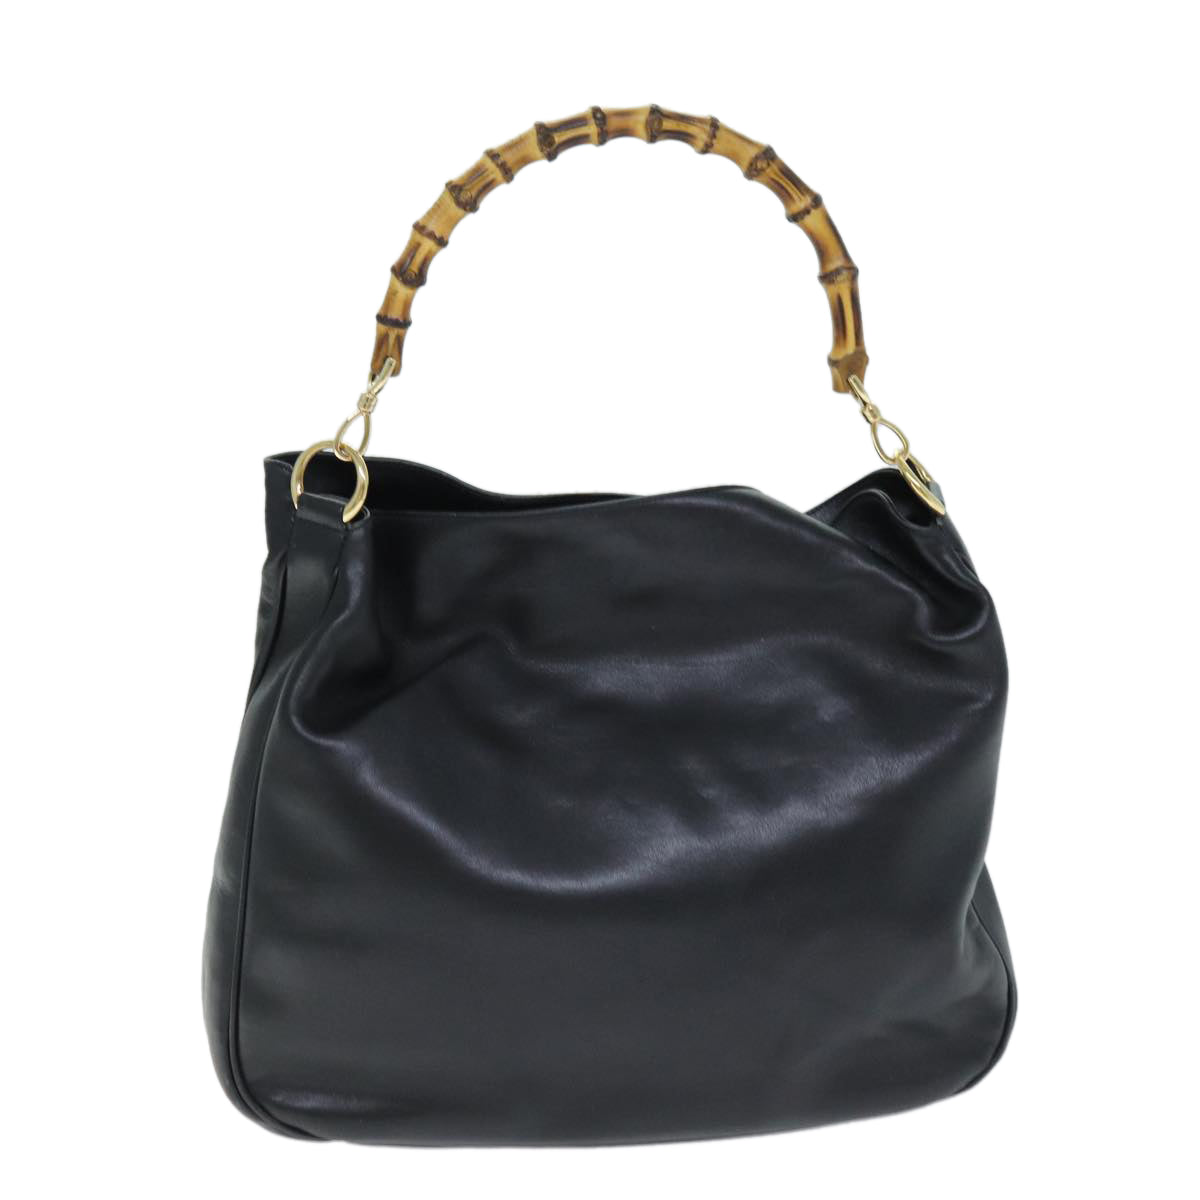 GUCCI Bamboo Hand Bag Leather 2way Black 001 1577 Auth yk12406